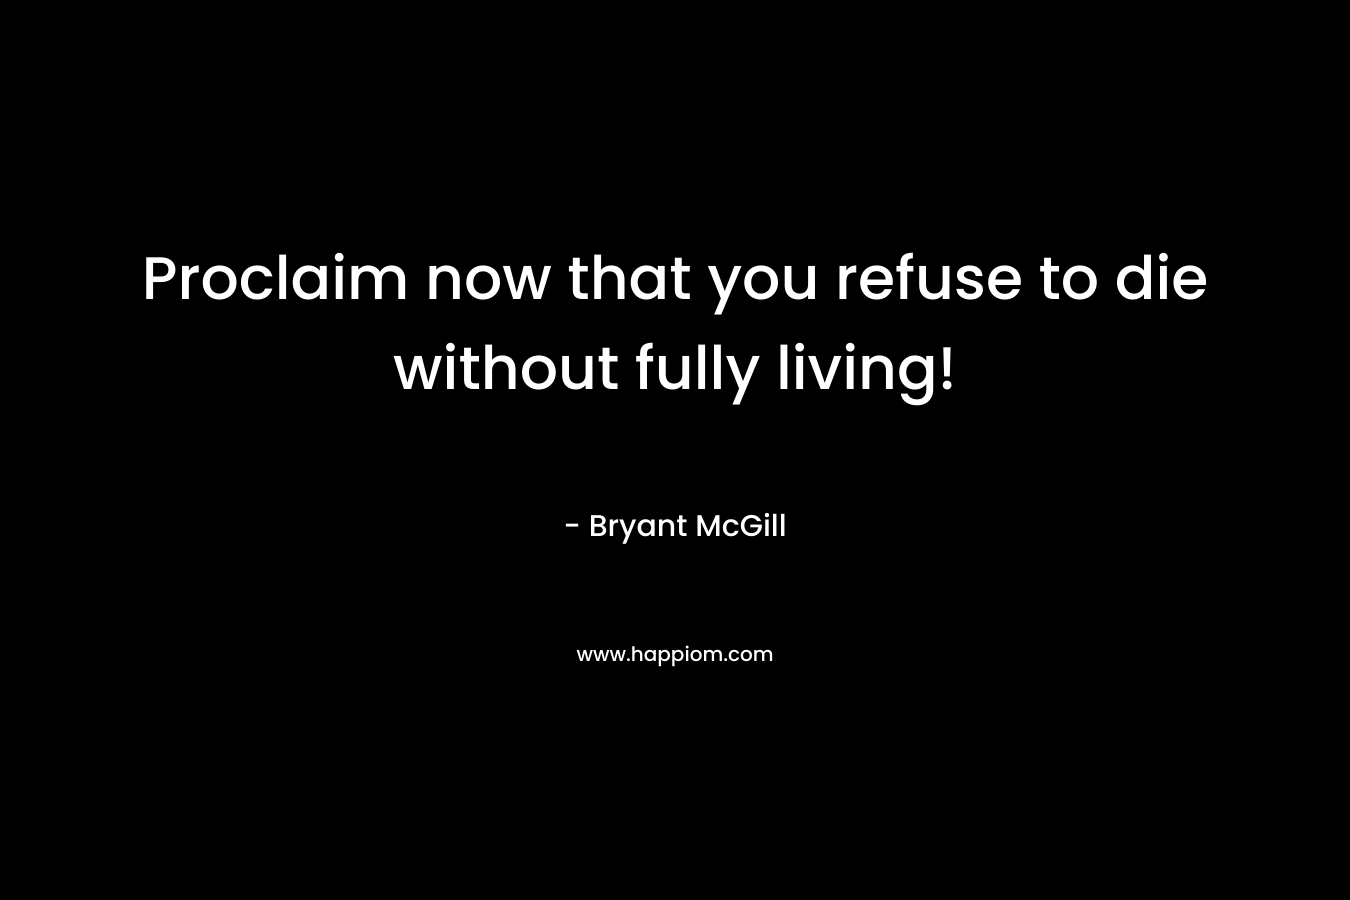 Proclaim now that you refuse to die without fully living! – Bryant McGill